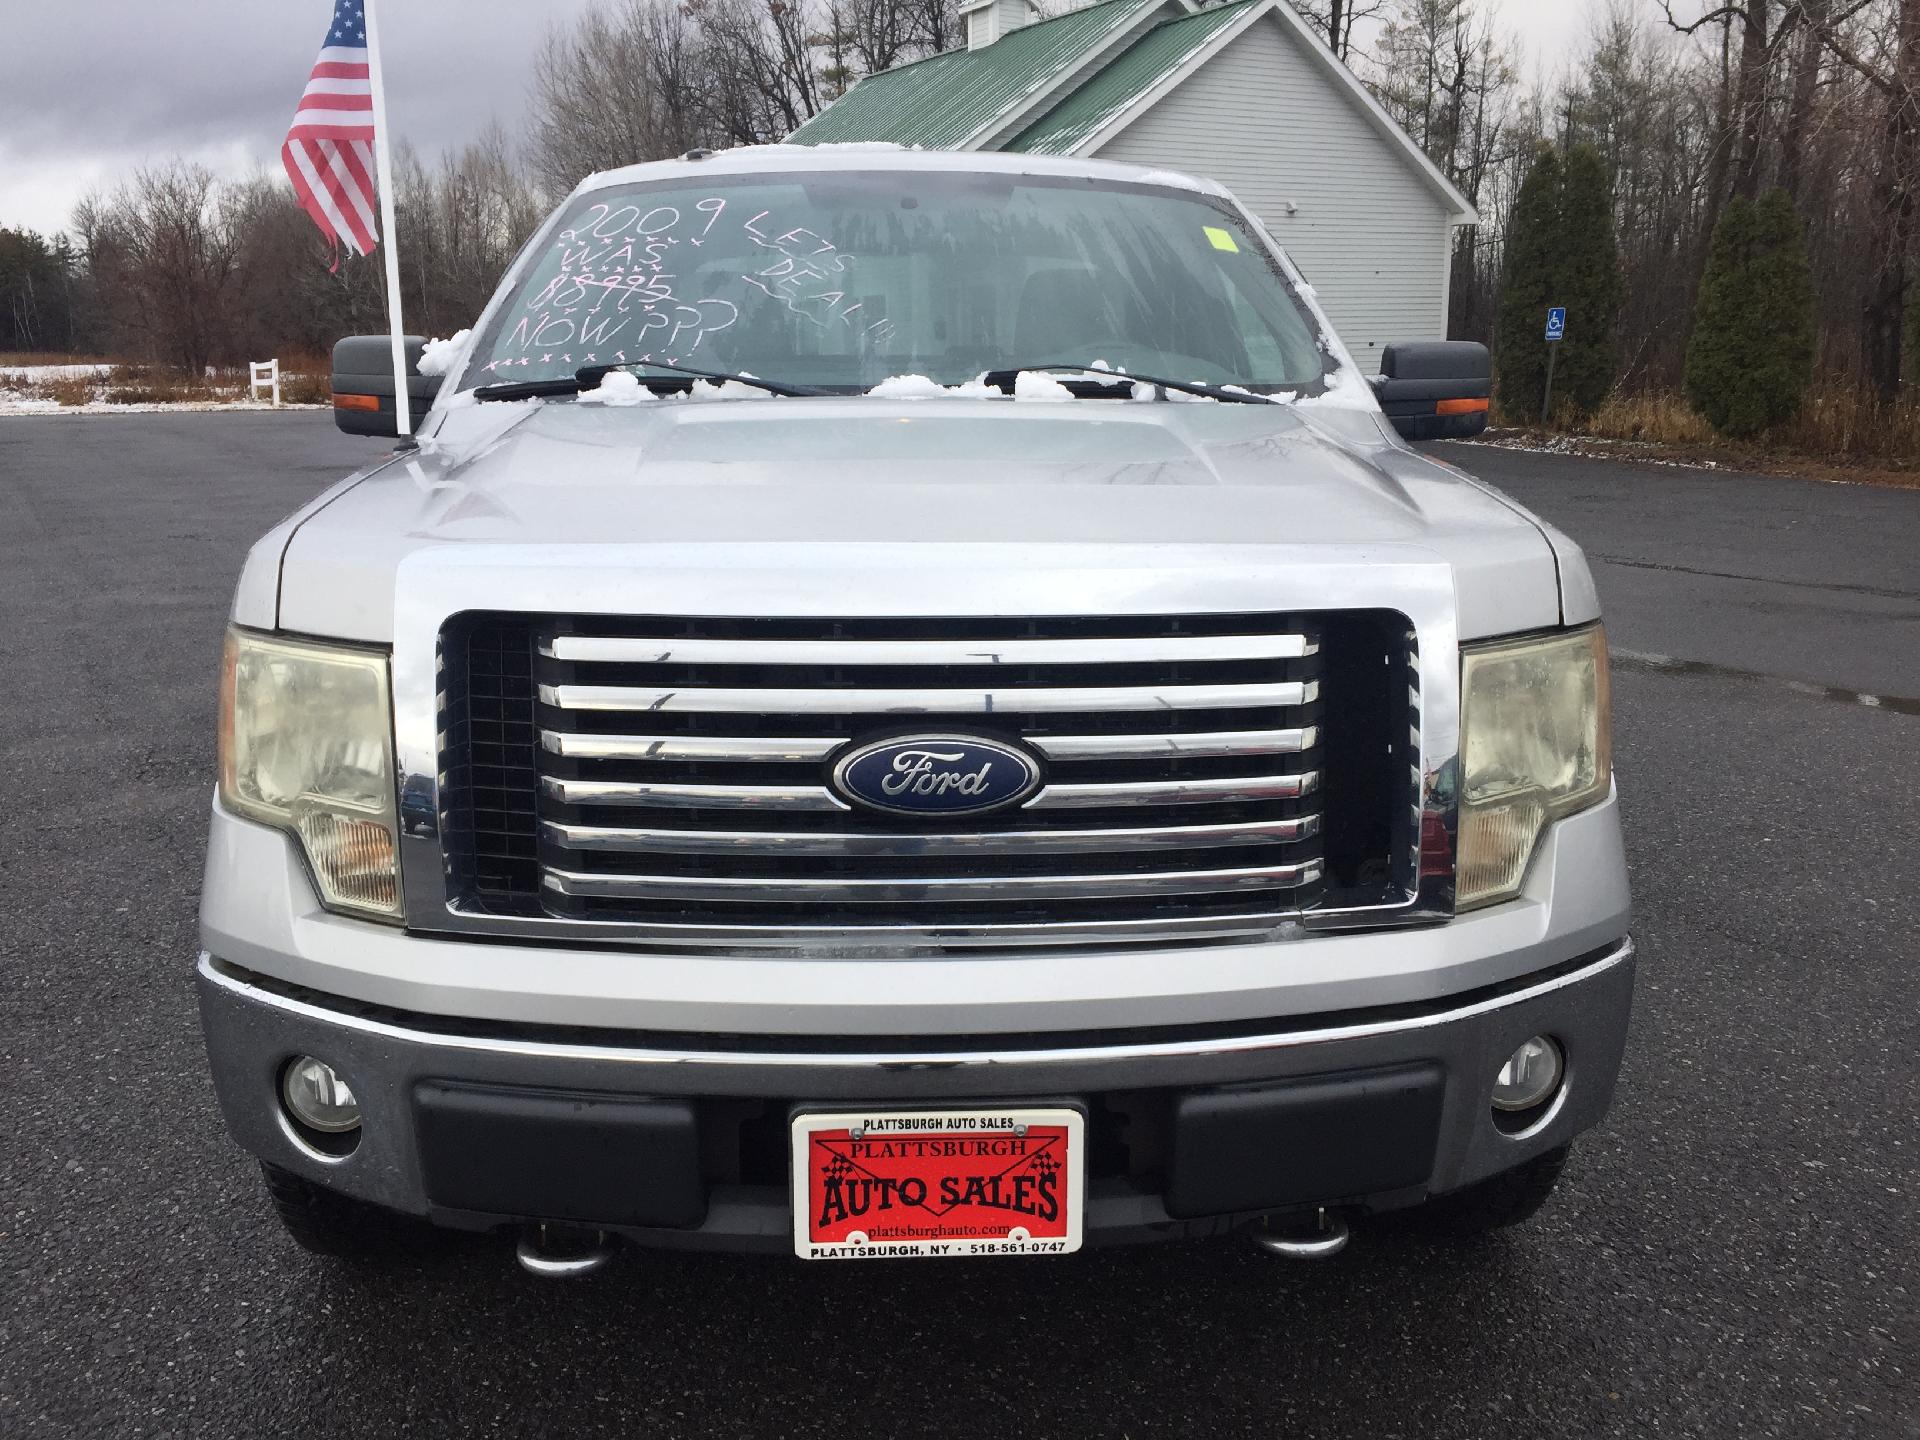 Used 2009 Ford F-150 XL with VIN 1FTPX14V69FA90559 for sale in Dannemora, NY